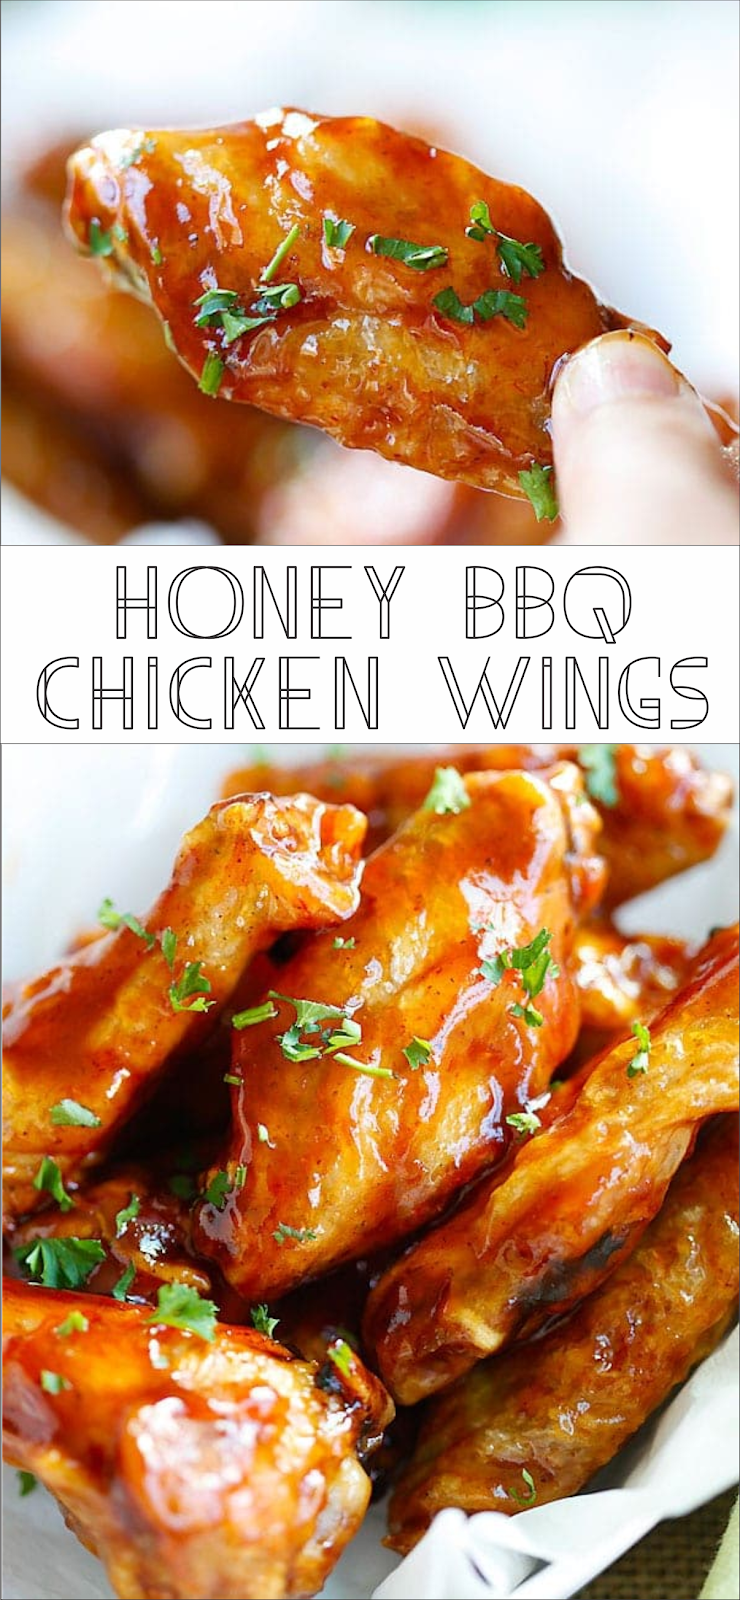 Honey BBQ Chicken Wings | Floats CO